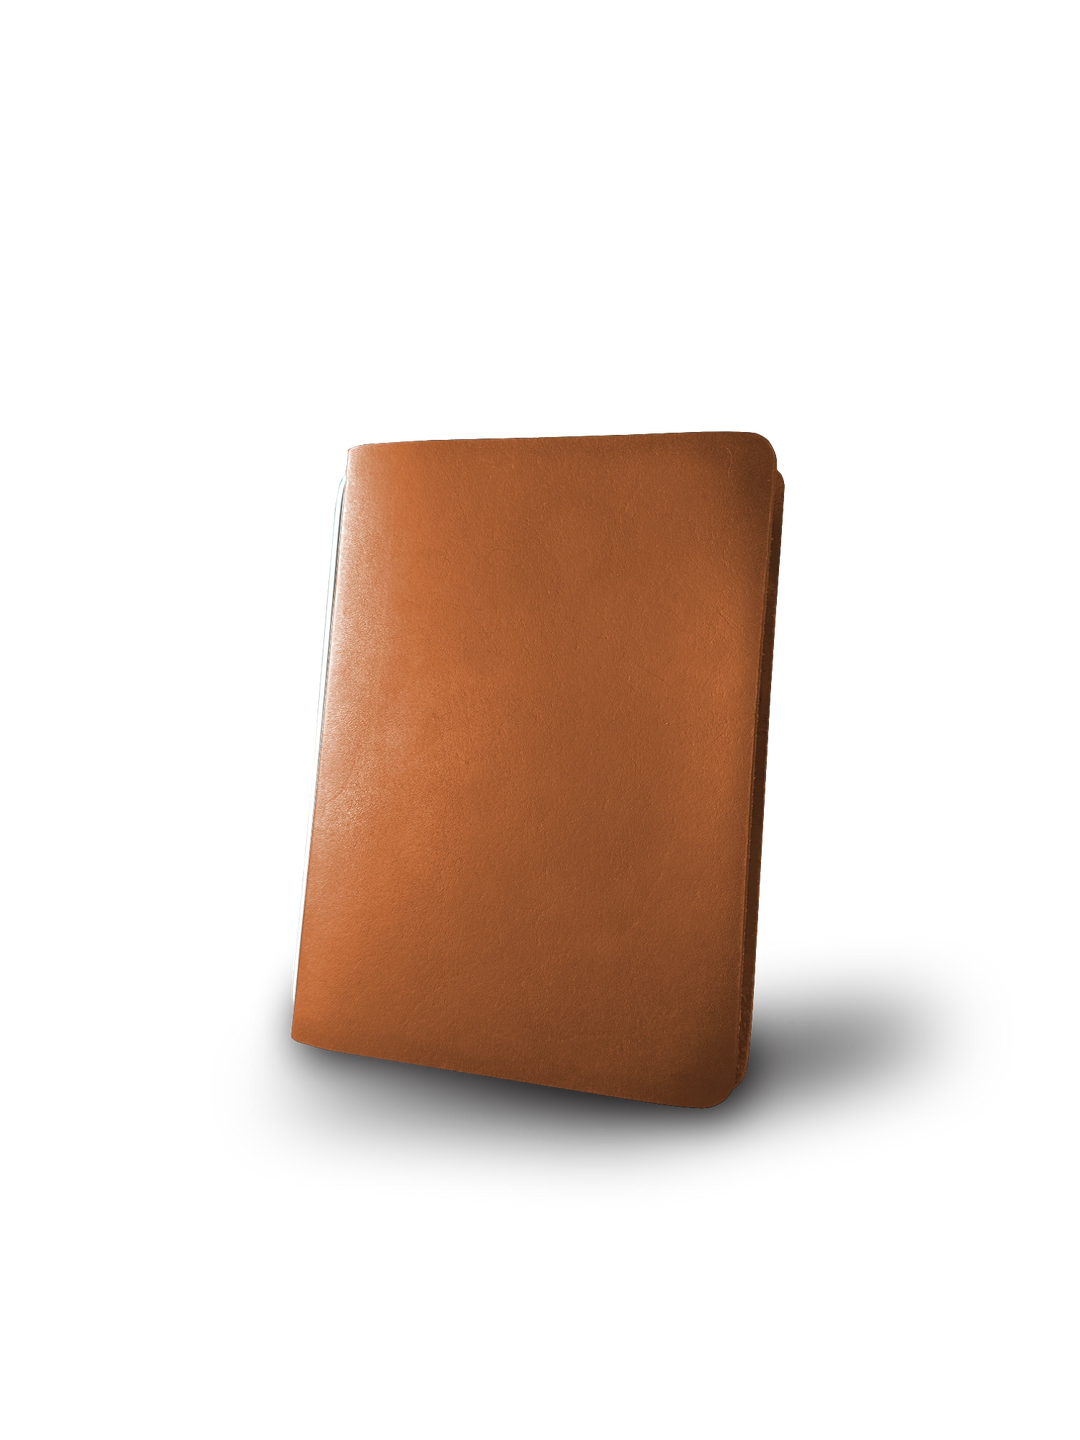 5x7 Cut - Refillable Leather Cover